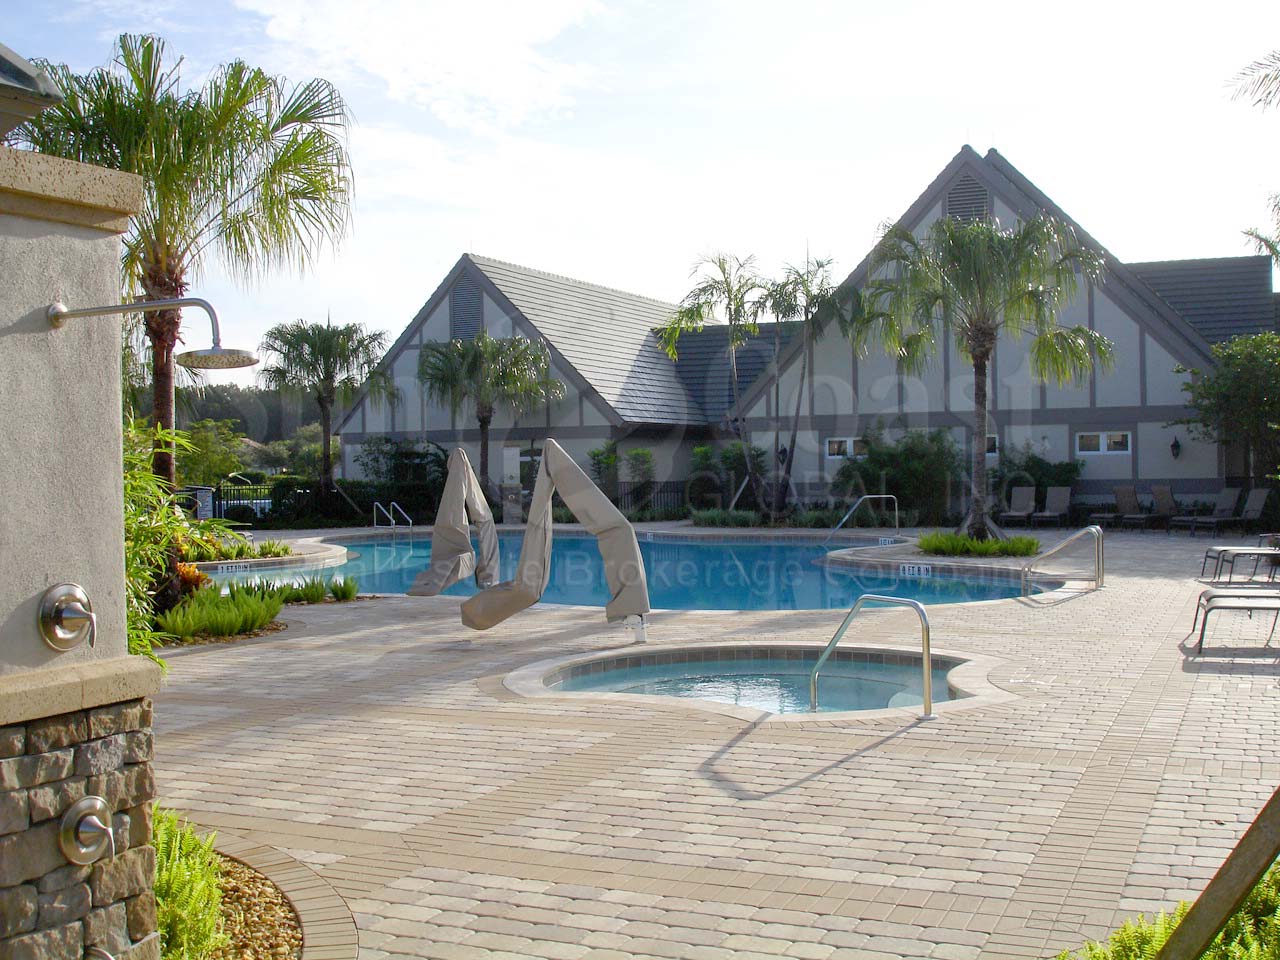 TWIN EAGLES Golf and Country Club pool area